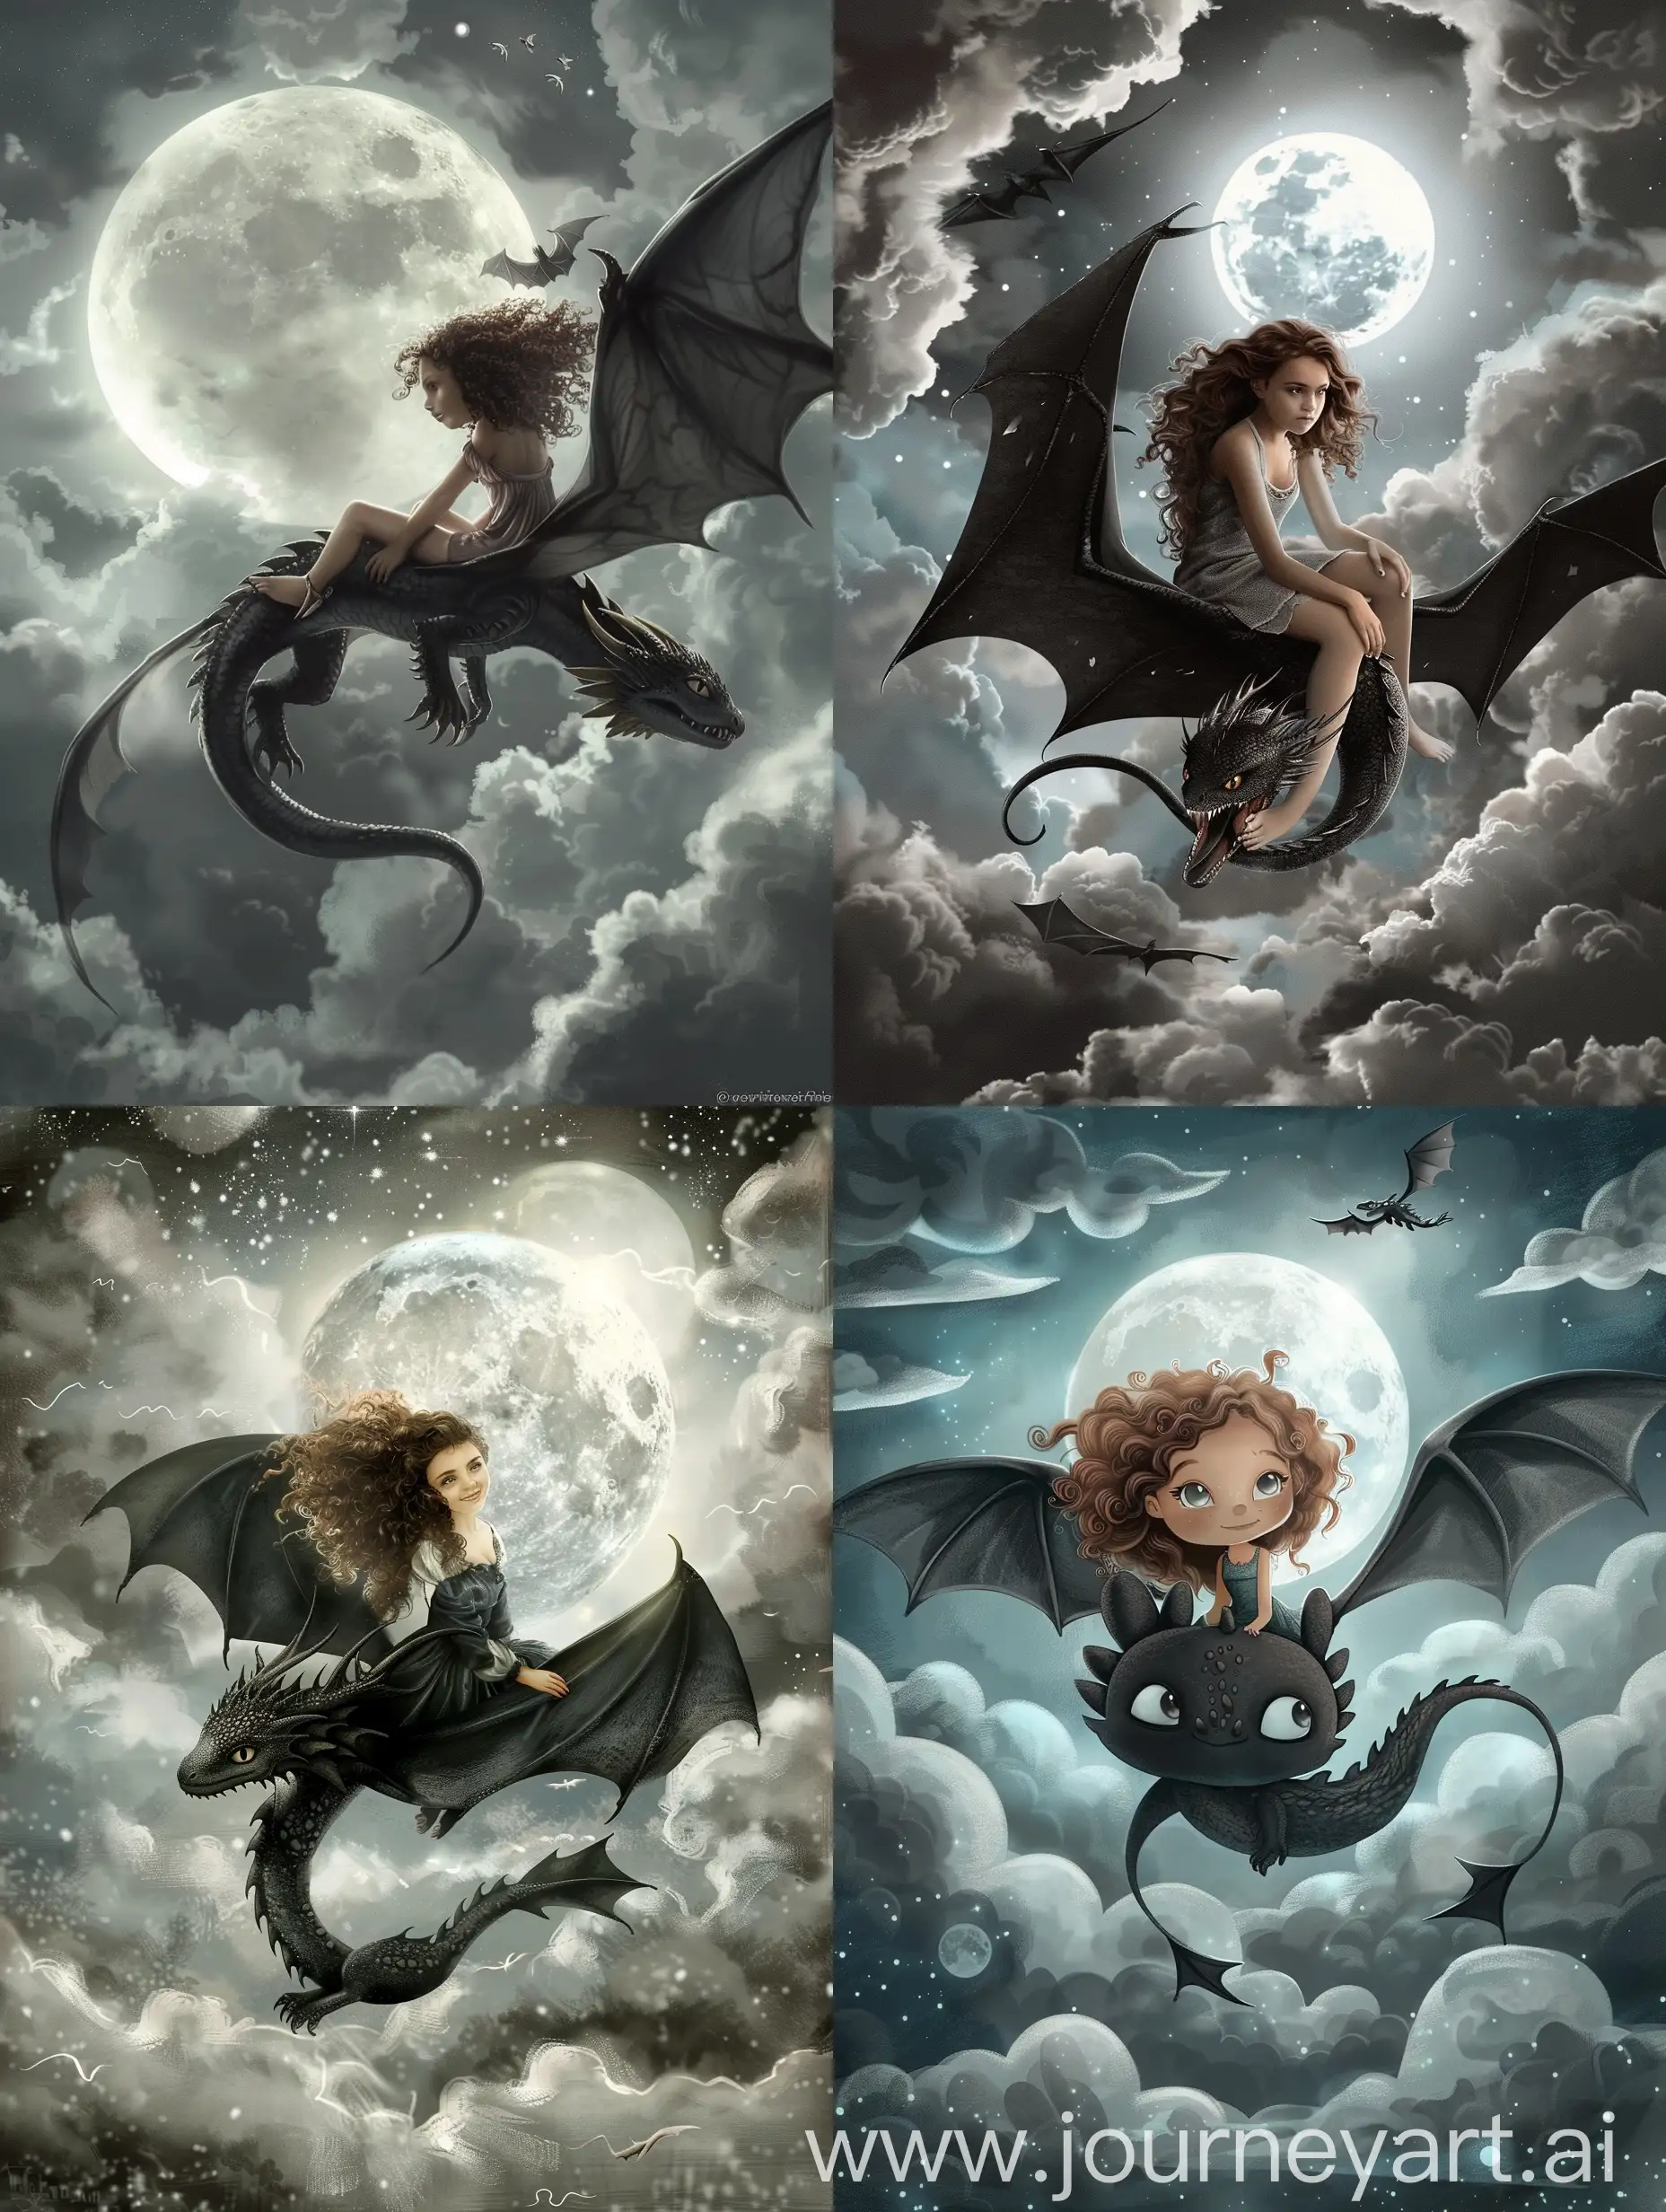 Curly-BrownHaired-Girl-Riding-Black-Dragon-Amidst-Moonlit-Clouds